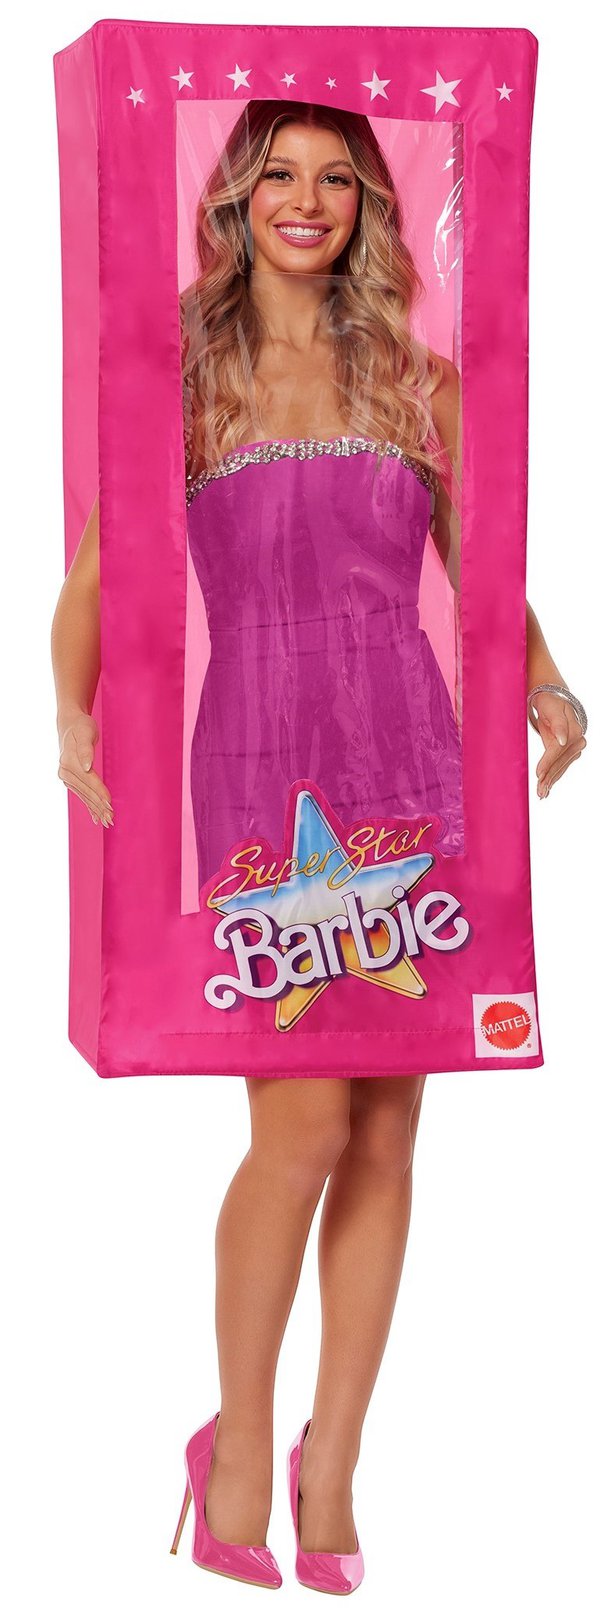 Parade: Barbie in a Box - Costumers Today